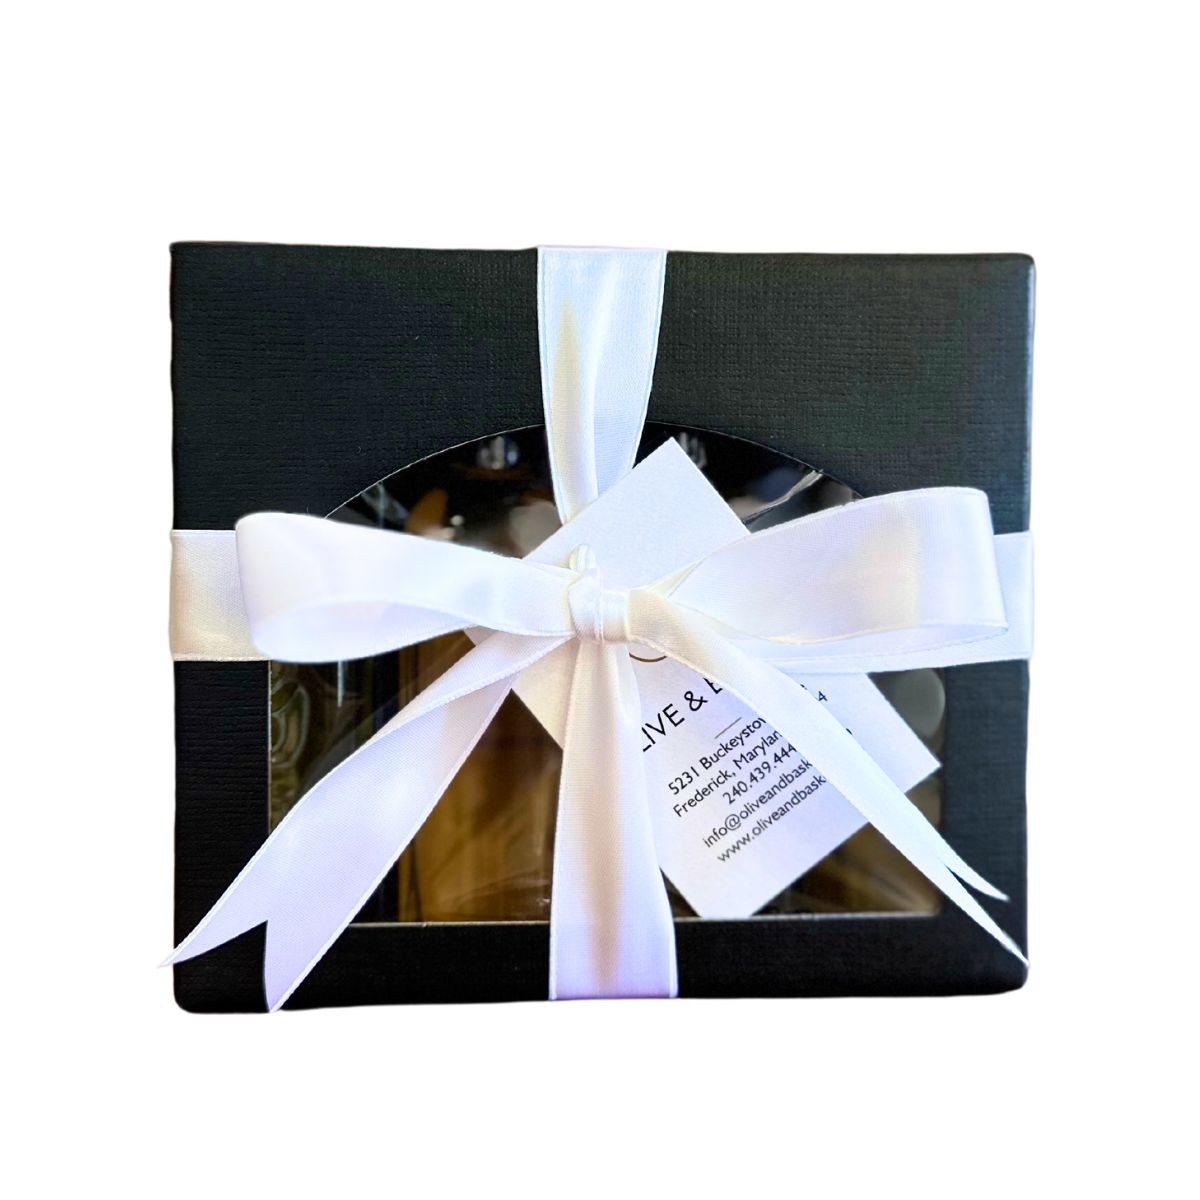 Gourmet Olive Oil Sample Gift Set- An assortment of our bestselling olives oils